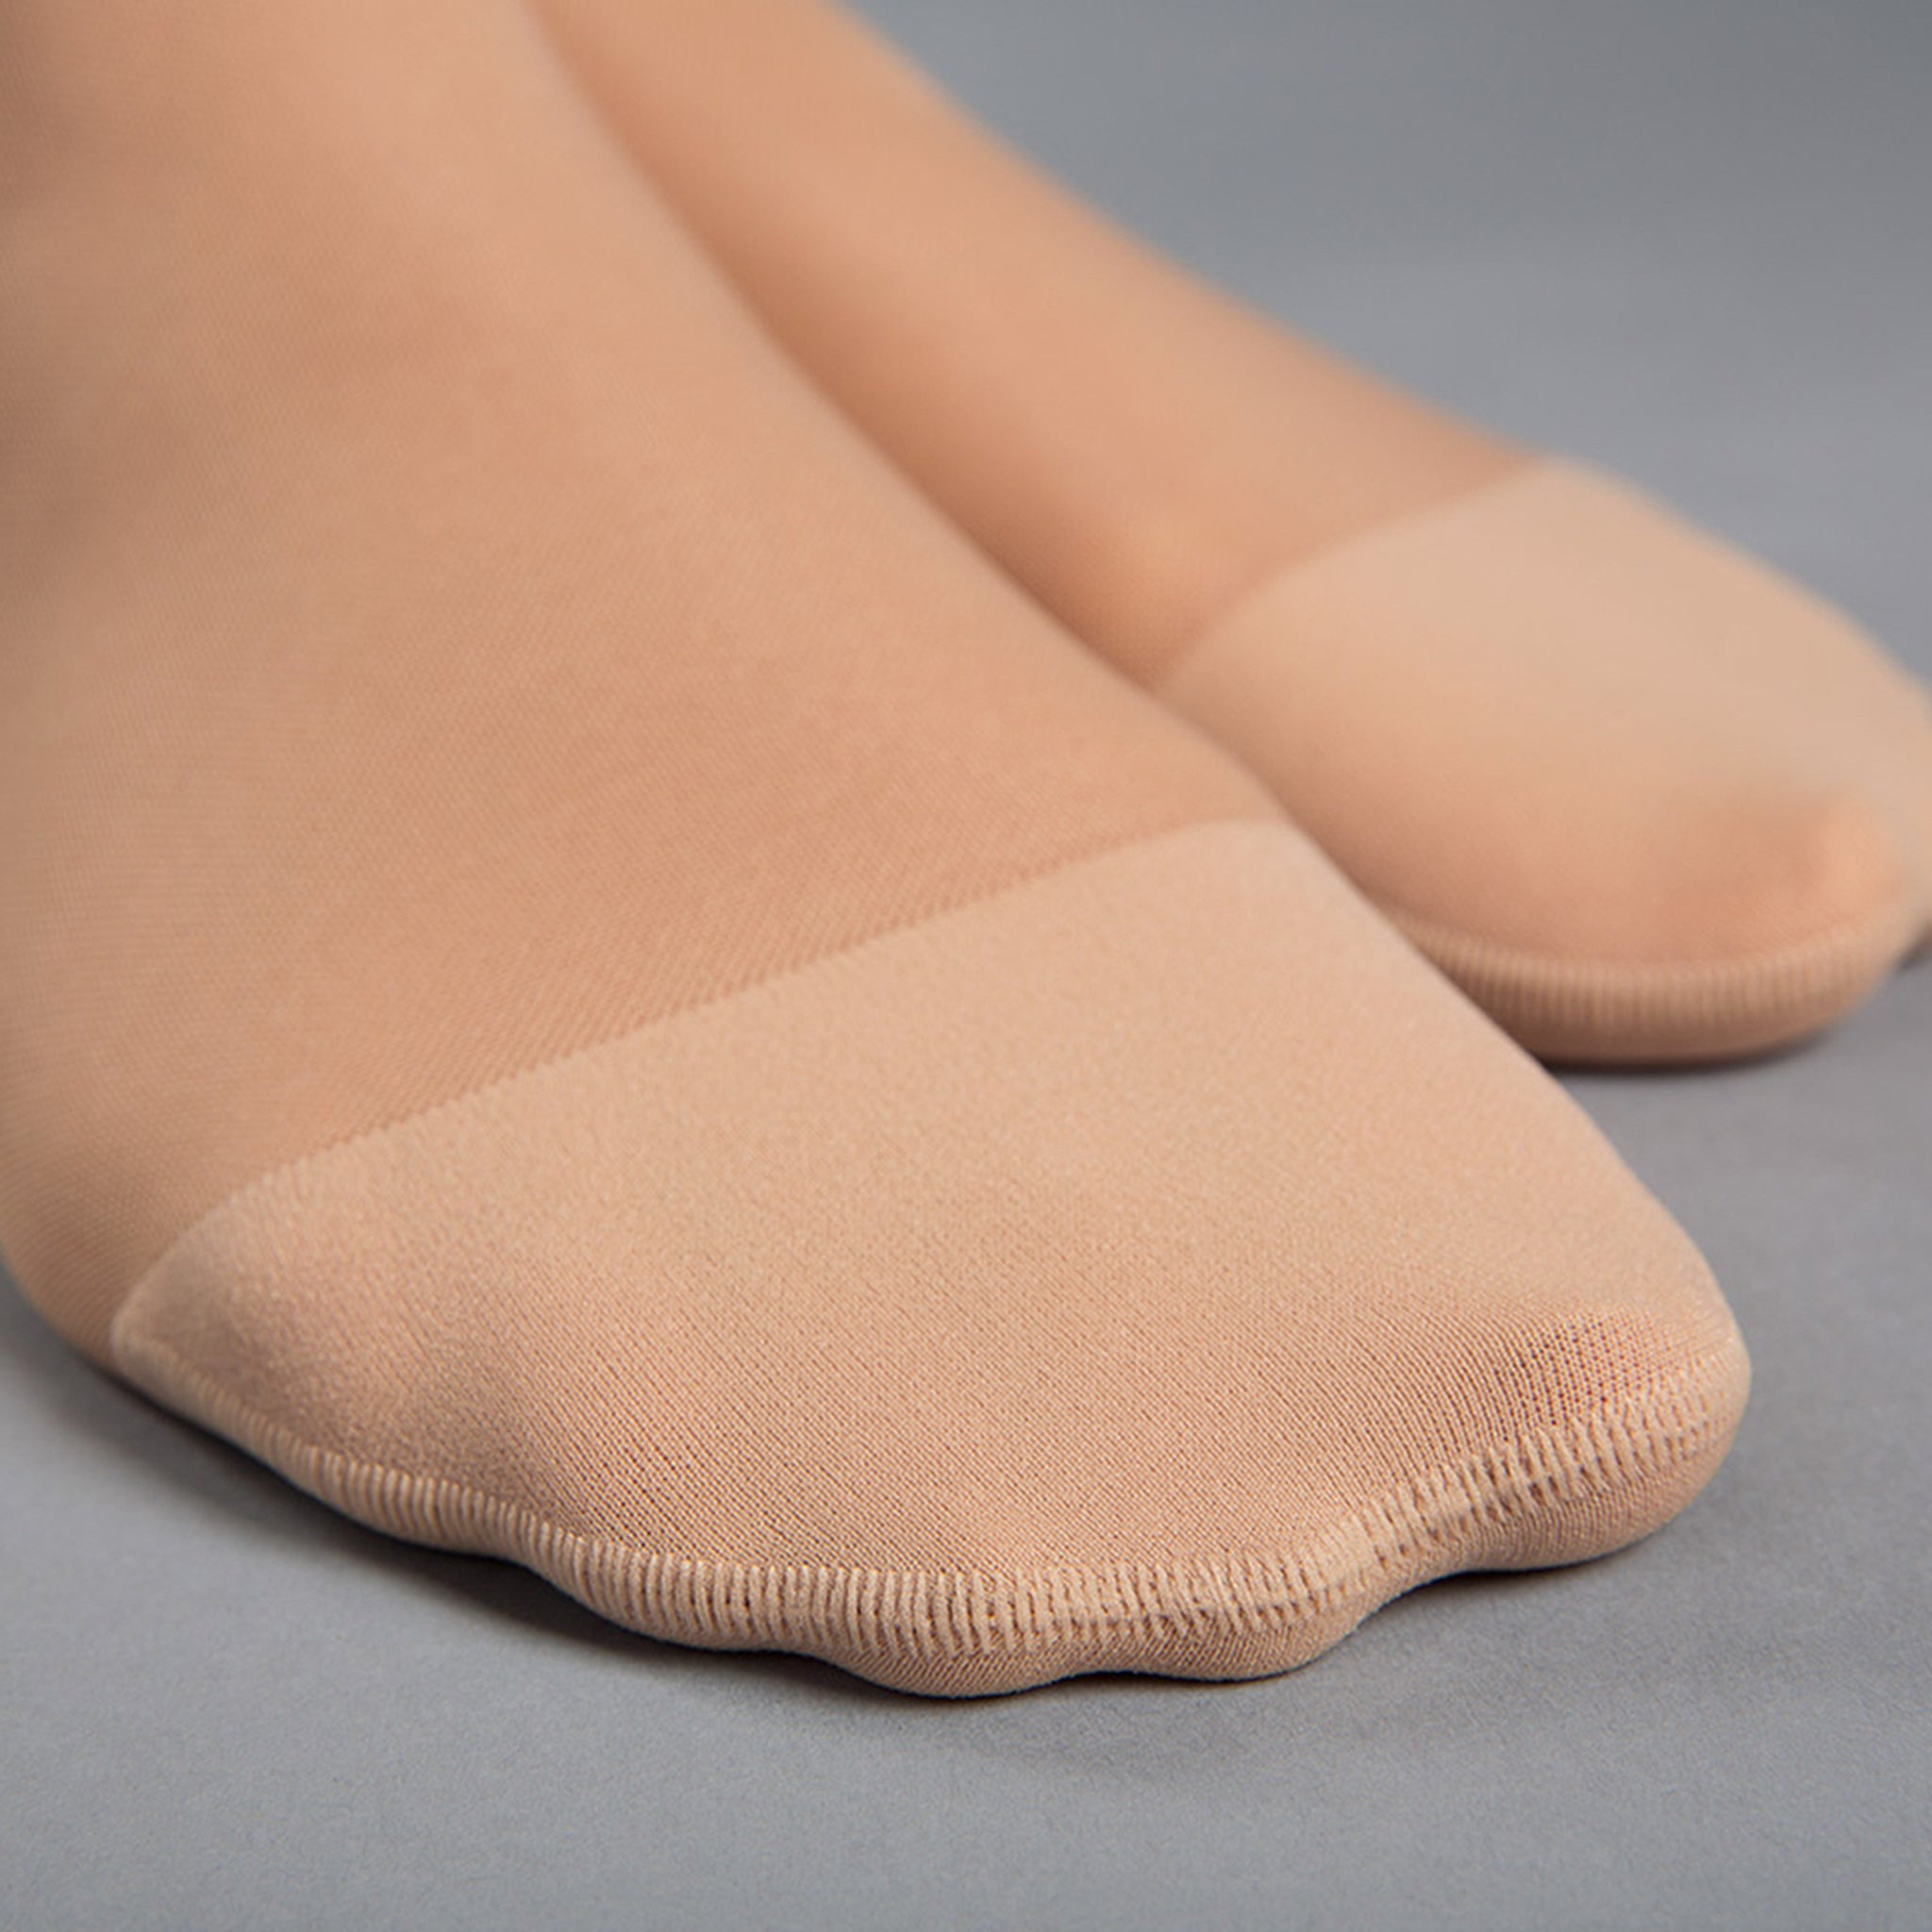 duomed transparent 20-30 mmHg Calf High Closed Toe Compression Stockings, Nude, Small-Petite